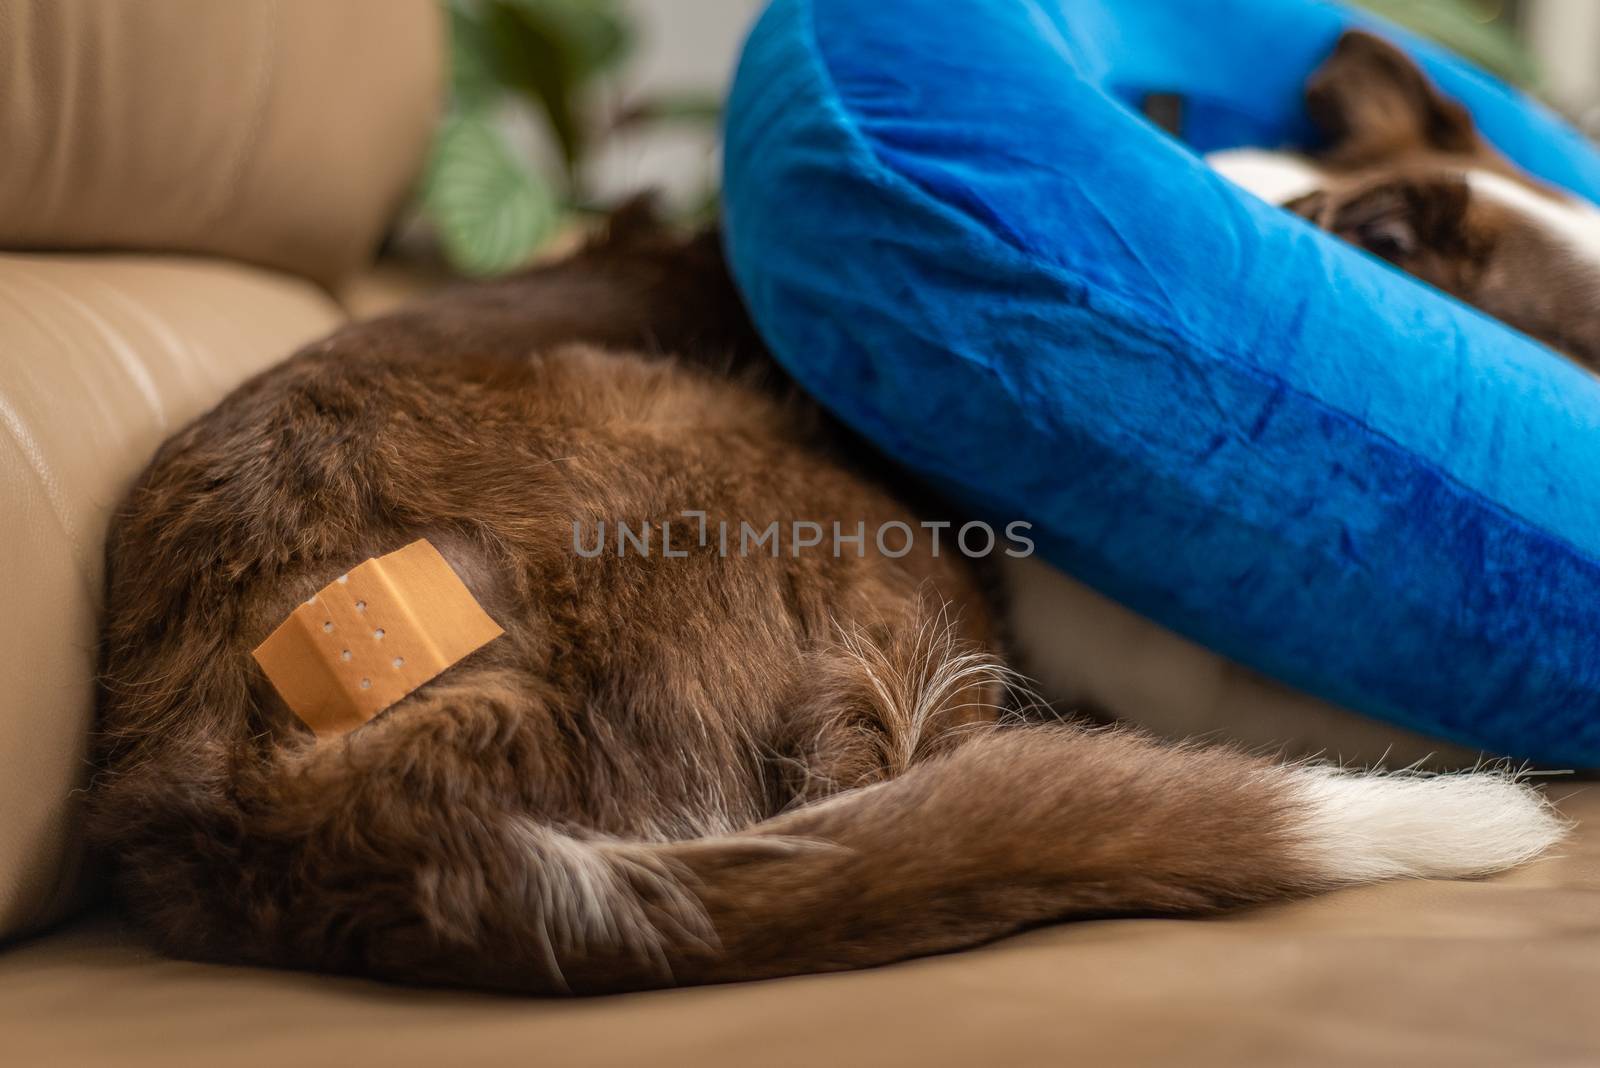 Dog laying on a couch, with a bandage and inflatable collar